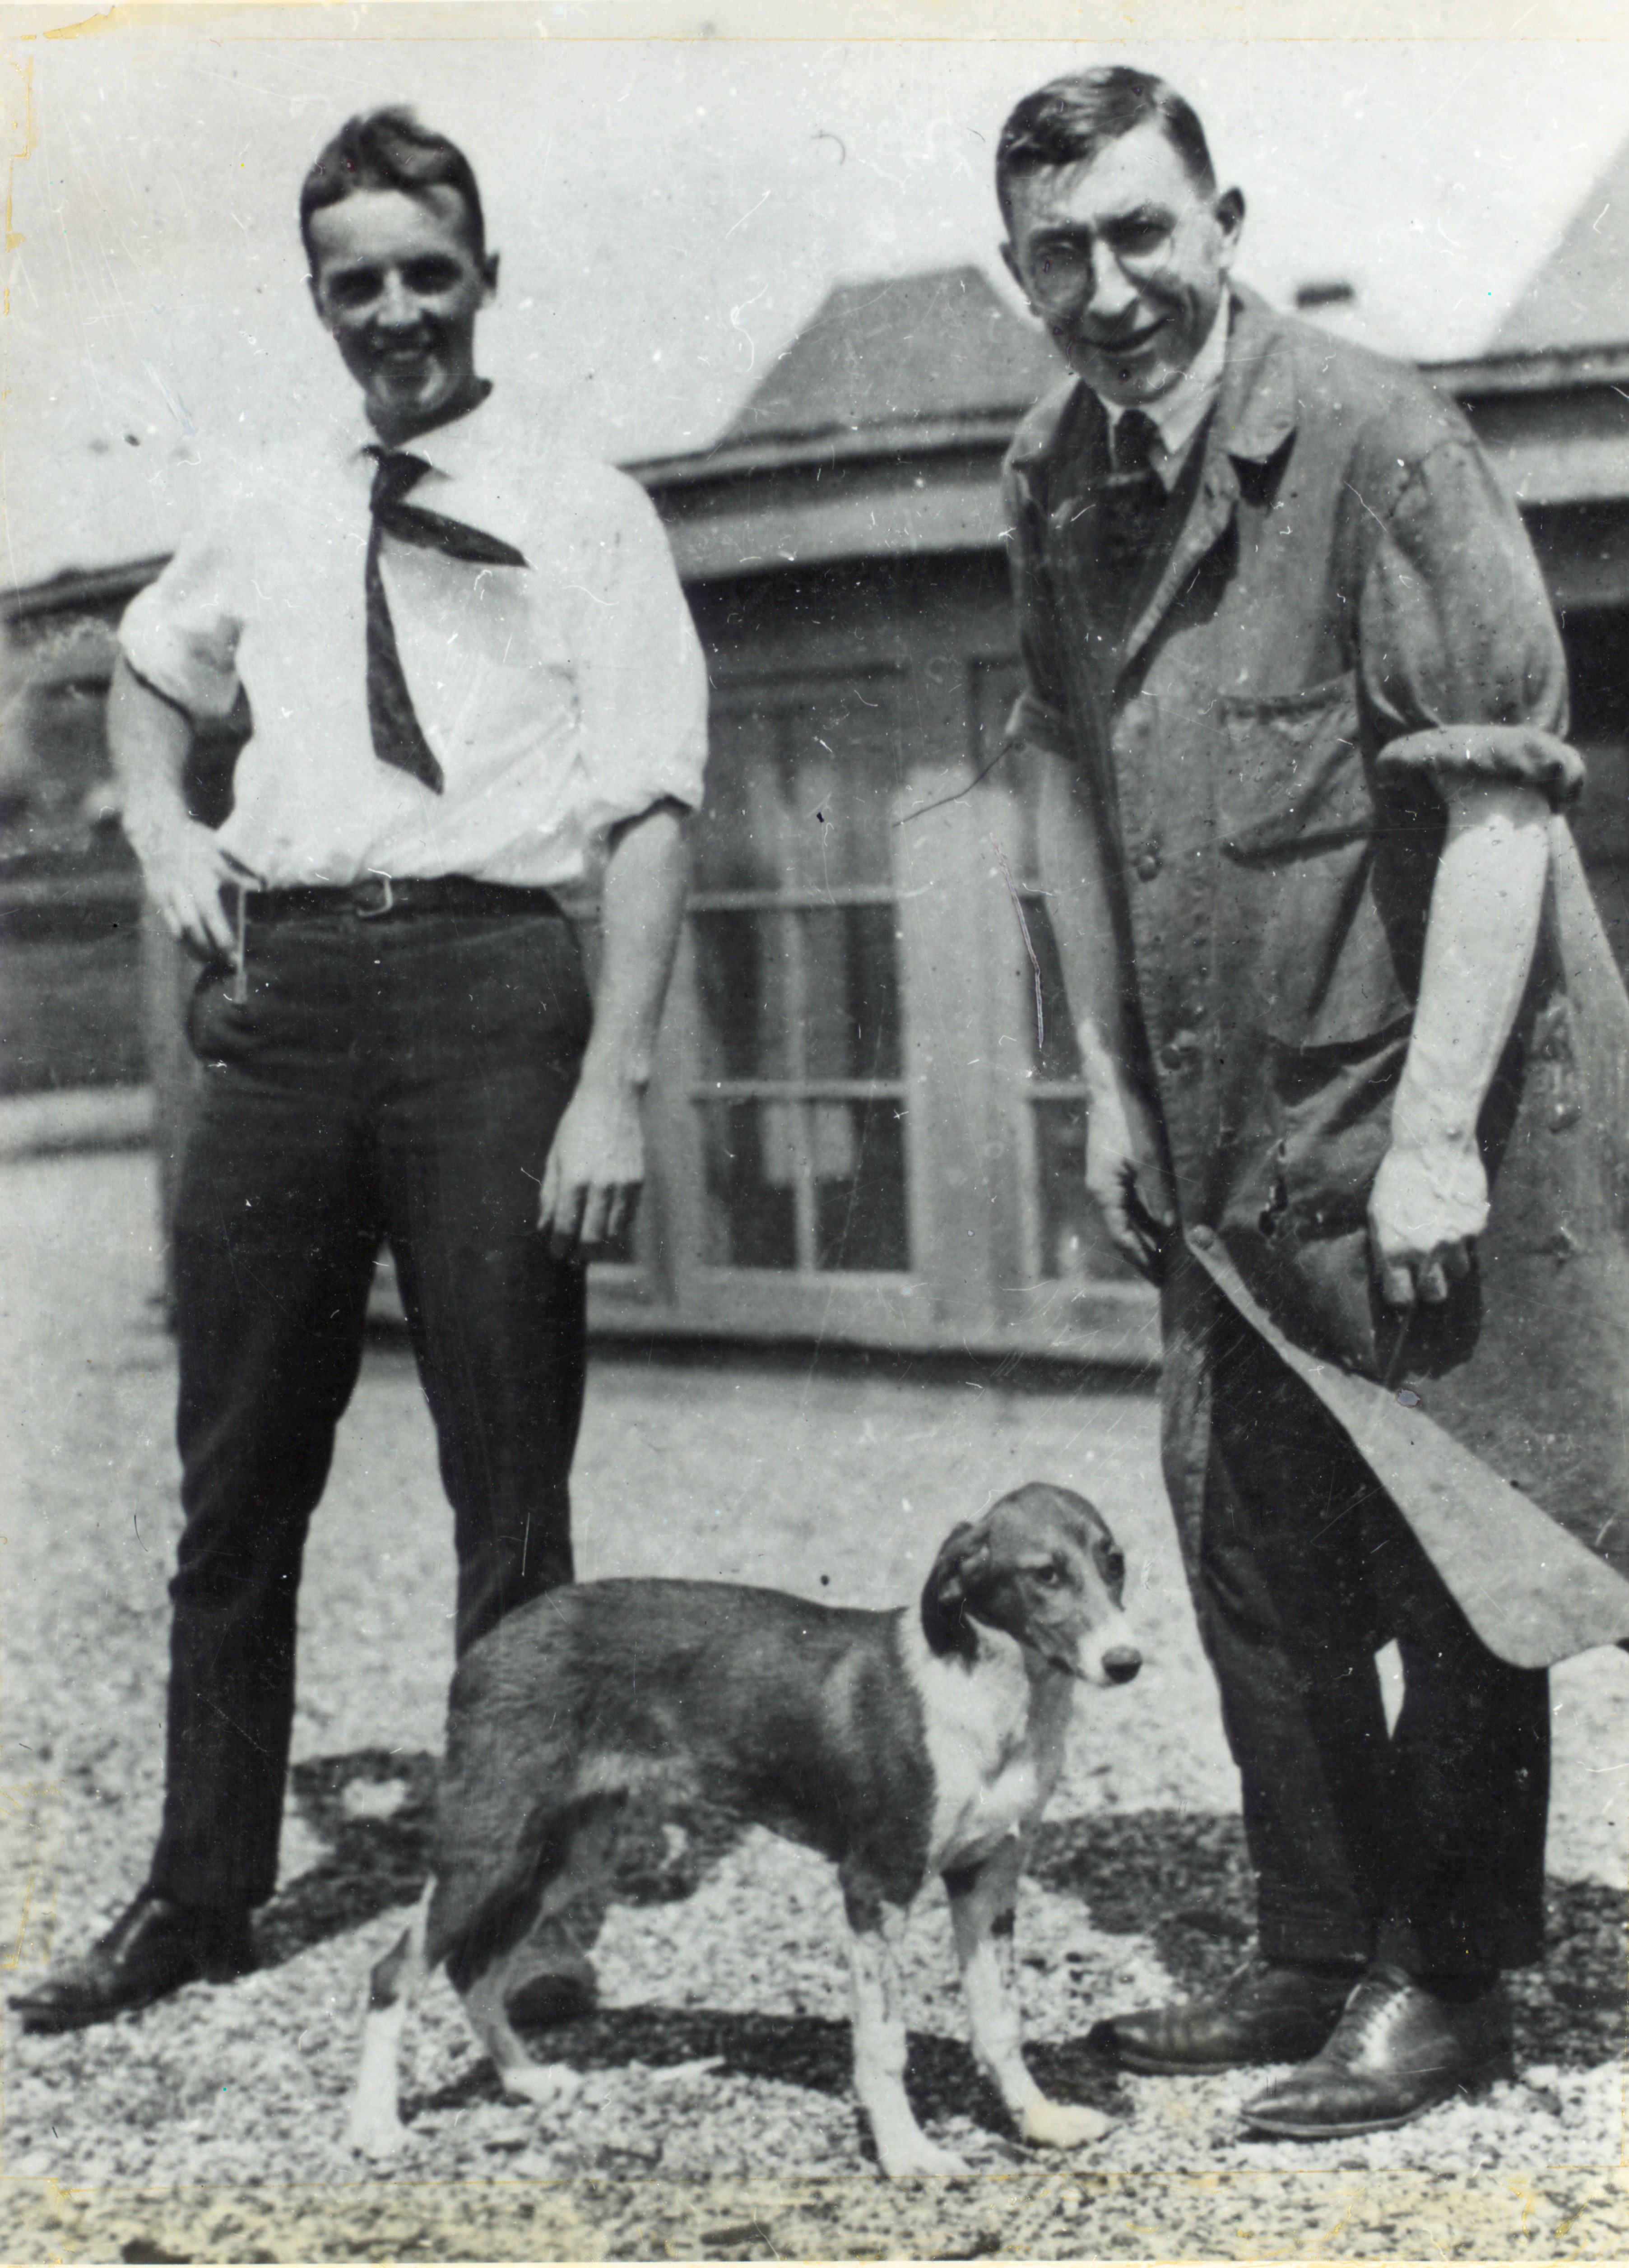 Frederick Banting, Charles Best and a dog standing on the roof of the Medical Building at the University of Toronto.